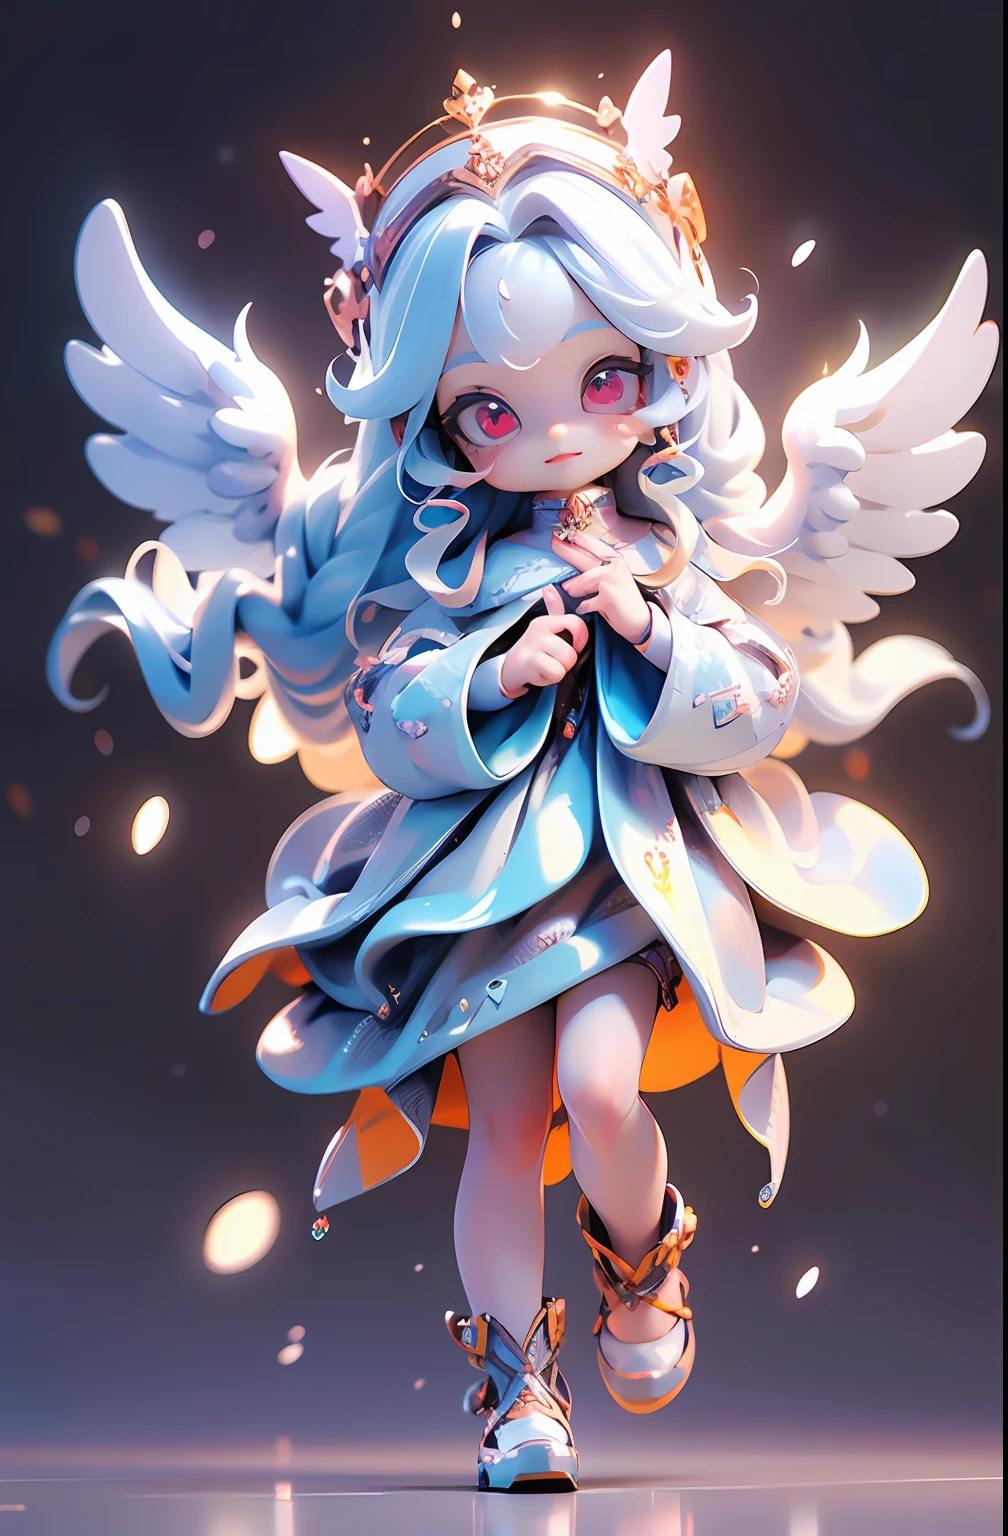 (Masterpiece: 1.4), (Best Quality: 1.4), (Chibi: 1.3), (Very Cute Angel Girl, Super Detailed Face, Jewel-like Eyes, White Very Long Hair, Colorful Gradient Hair: 1.4), (Angel Ring:
1.4), (Angel Wings: 1.4), (Full body, perfect 2 arms, perfect 2 legs: 1.4), Perfect 4 fingers: 1 thumb, light, shine, bokeh, super fine